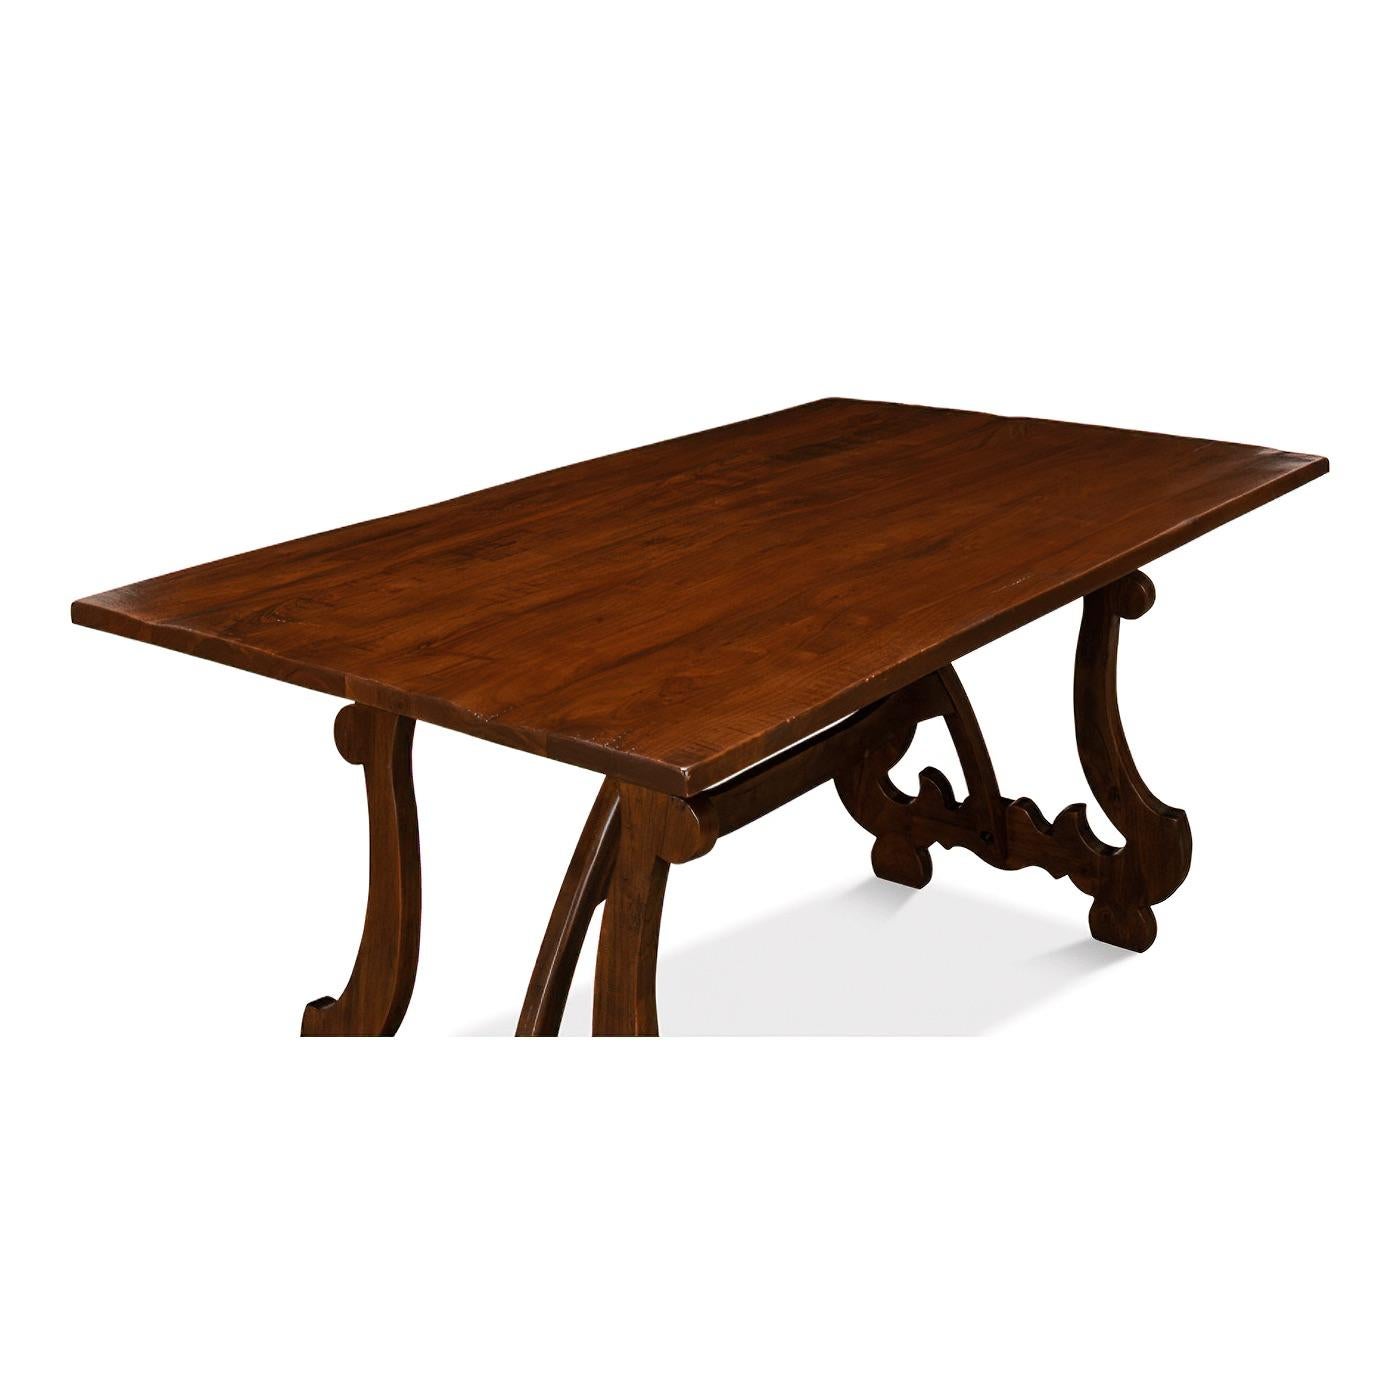 Wood European Country Style Dining Table For Sale